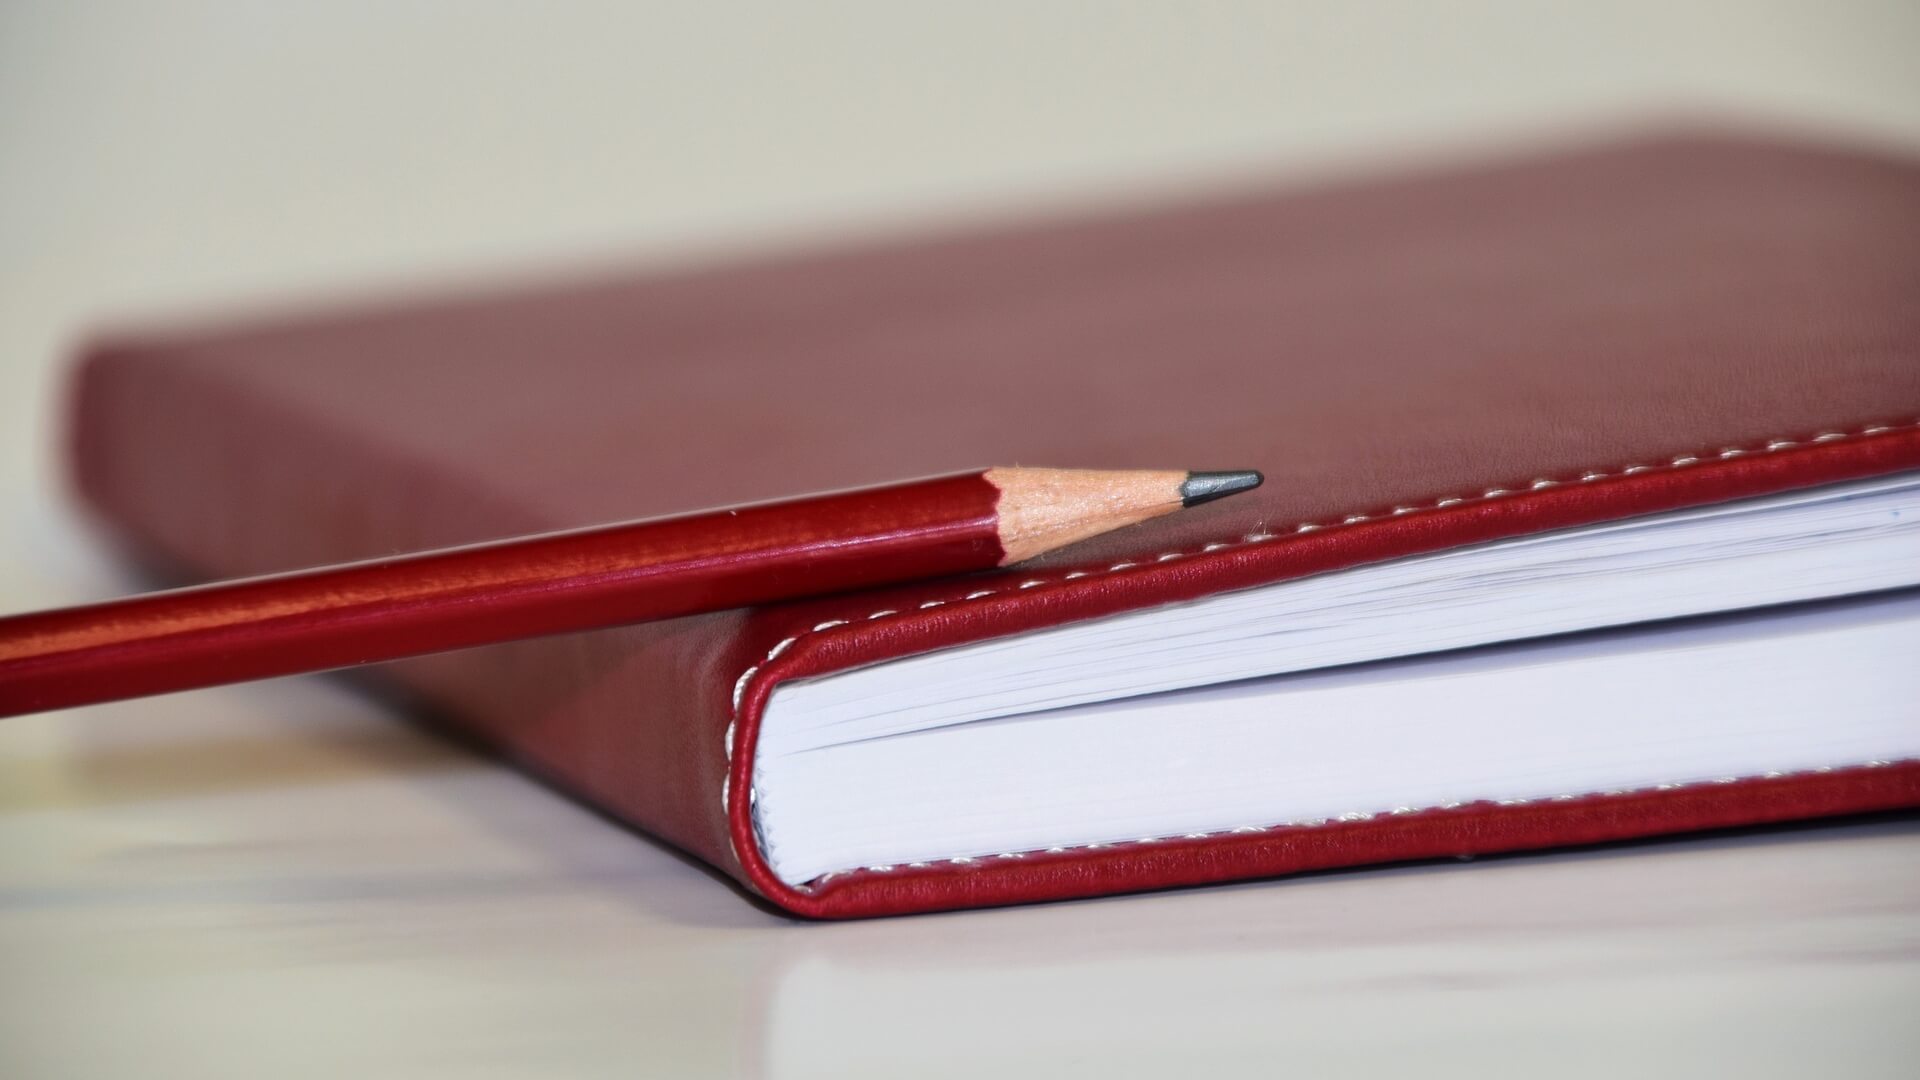 A red pencil lies on a red book.